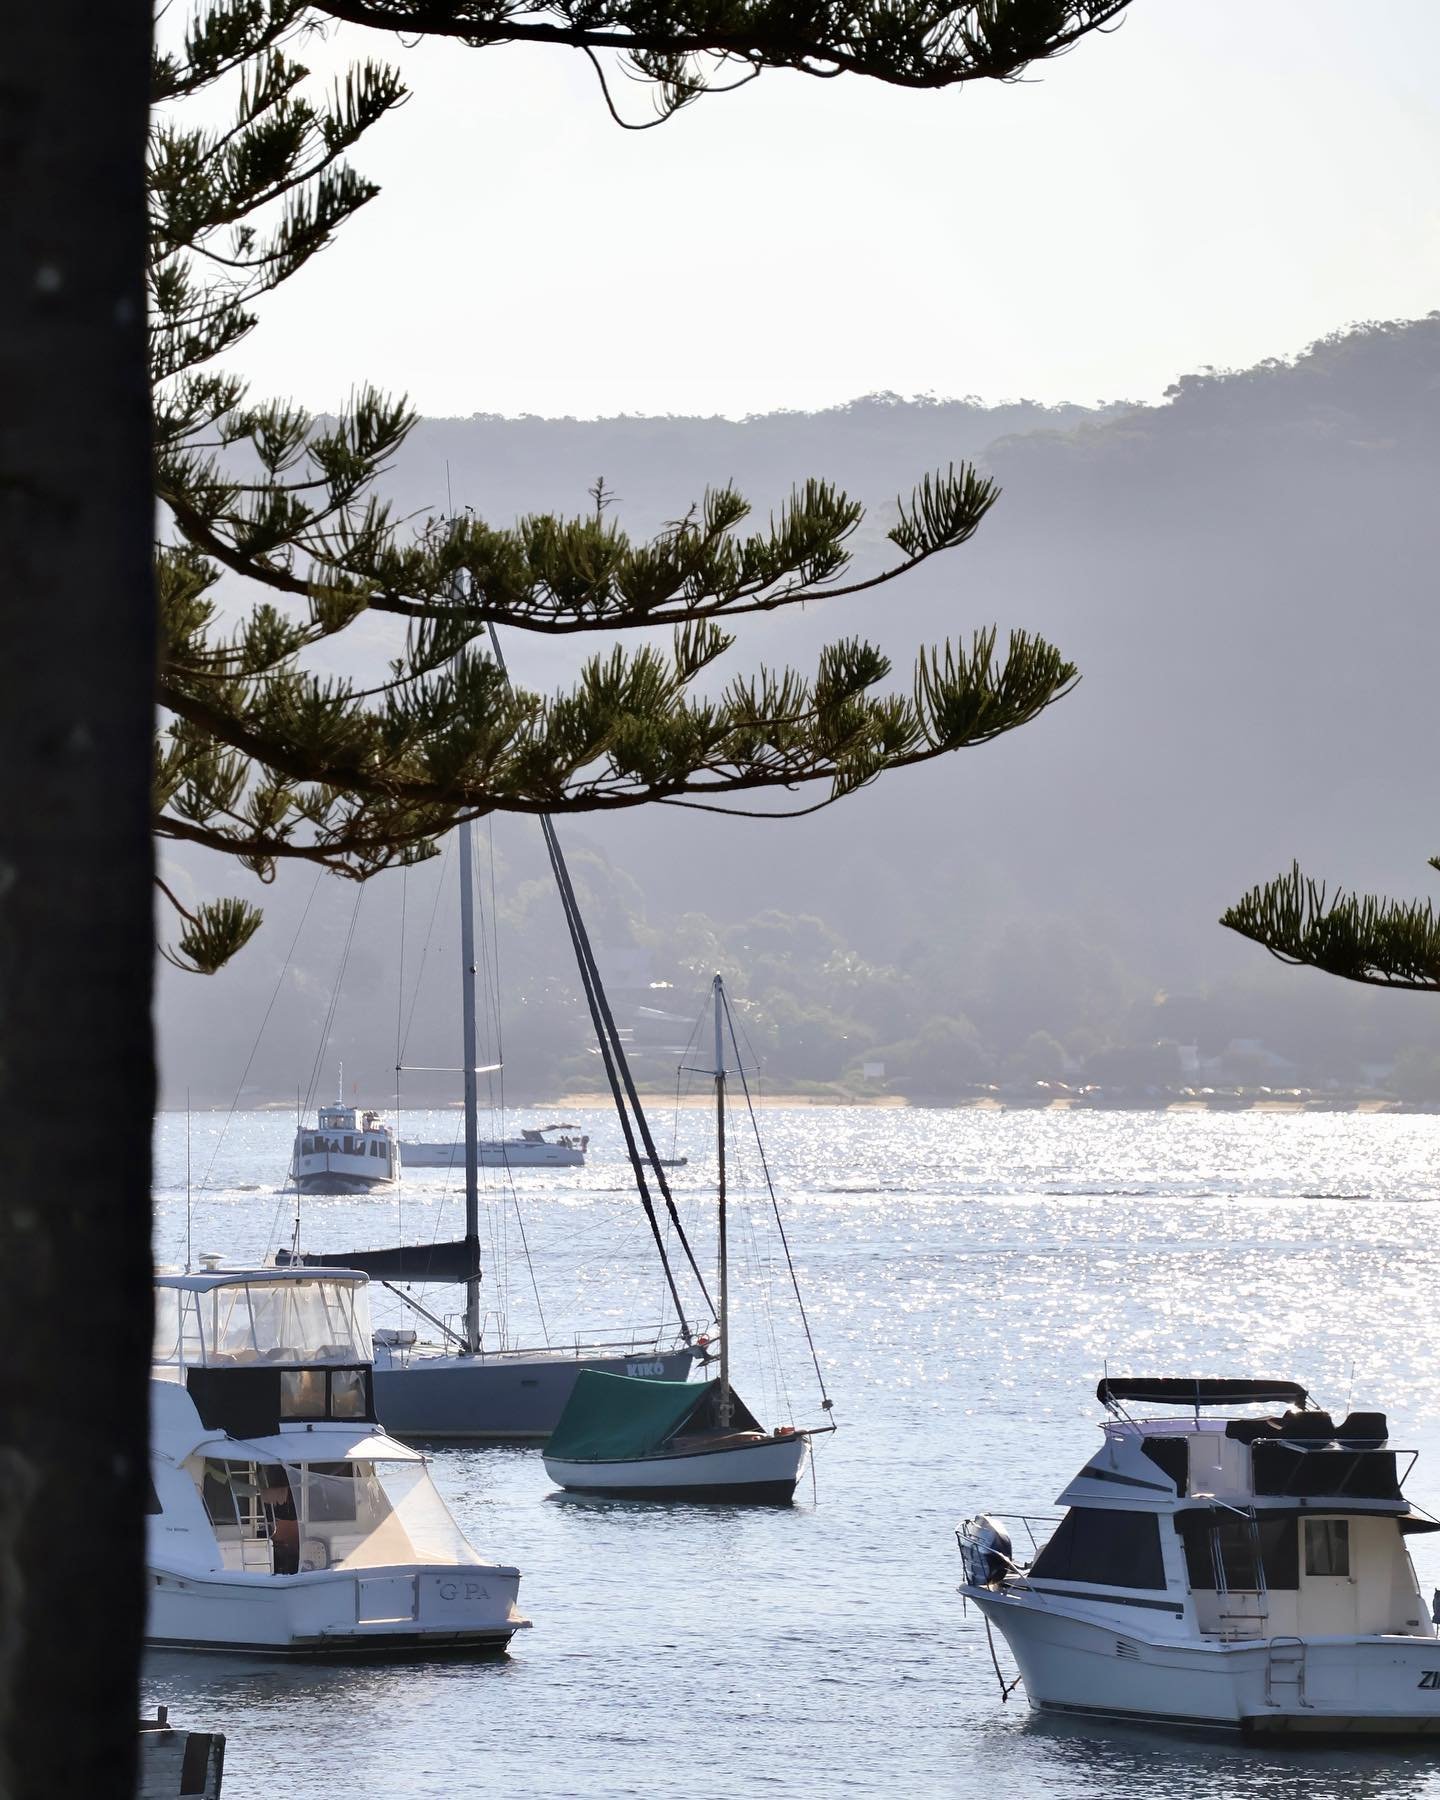 The little Boathouse ferry through the trees from Barrenjoey House. If you&rsquo;re looking for a school holiday activity, jump aboard with the family (and the dog!) to visit Patonga for the day. ☀️